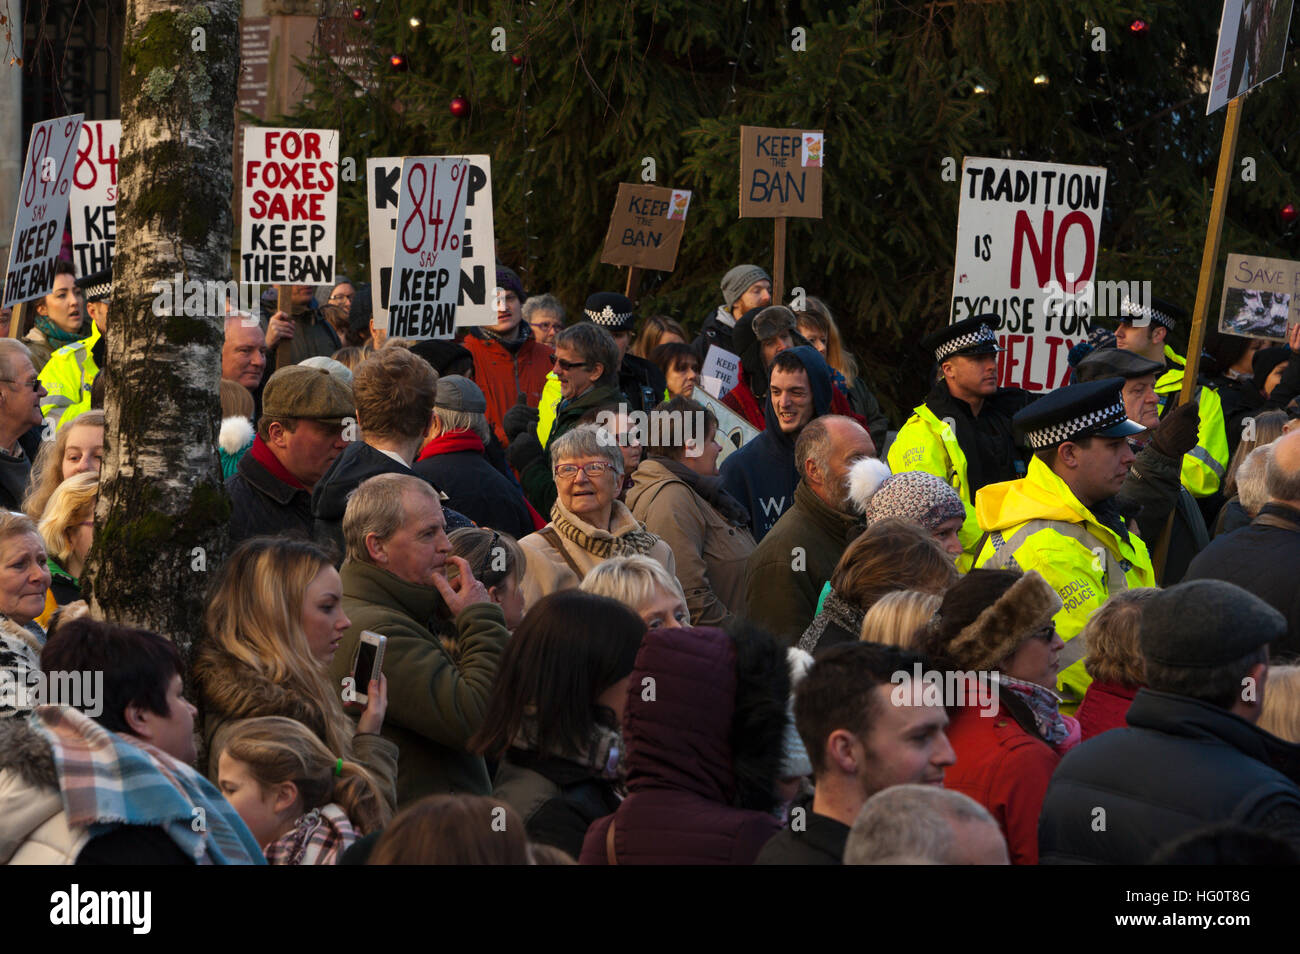 Carmarthen, Carmarthenshire, Wales, UK. 2nd January, 2016. Police keep hunt supporters and hunt protesters apart. Anti-Bloodsport activists gather in the Welsh town of Carmarthen to voice their anger at the continued illegal hunting with dogs - hunting with dogs was made illegal in 2004 by The Hunting Act 2004 (c37). The Anti-Hunt protest takes place on the day that the Carmarthenshire Hunt have chosen to parade through the town to collect money and support for their blood-sports. © Graham M. Lawrence/Alamy Live News. Stock Photo